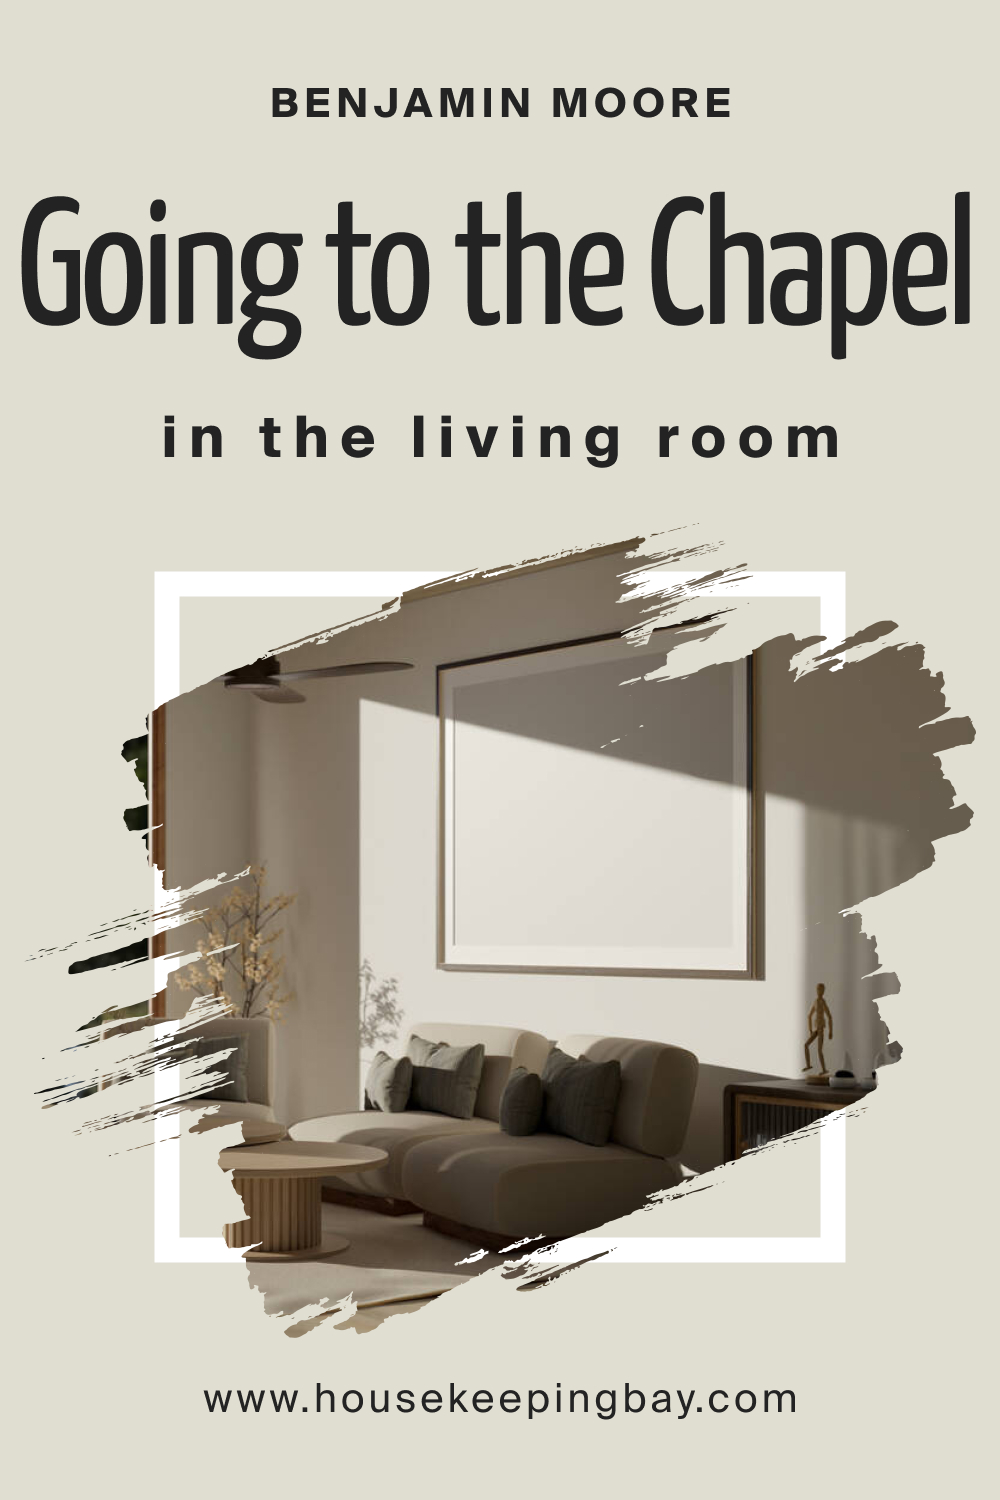 BM Going to the Chapel 1527 In the Living Room